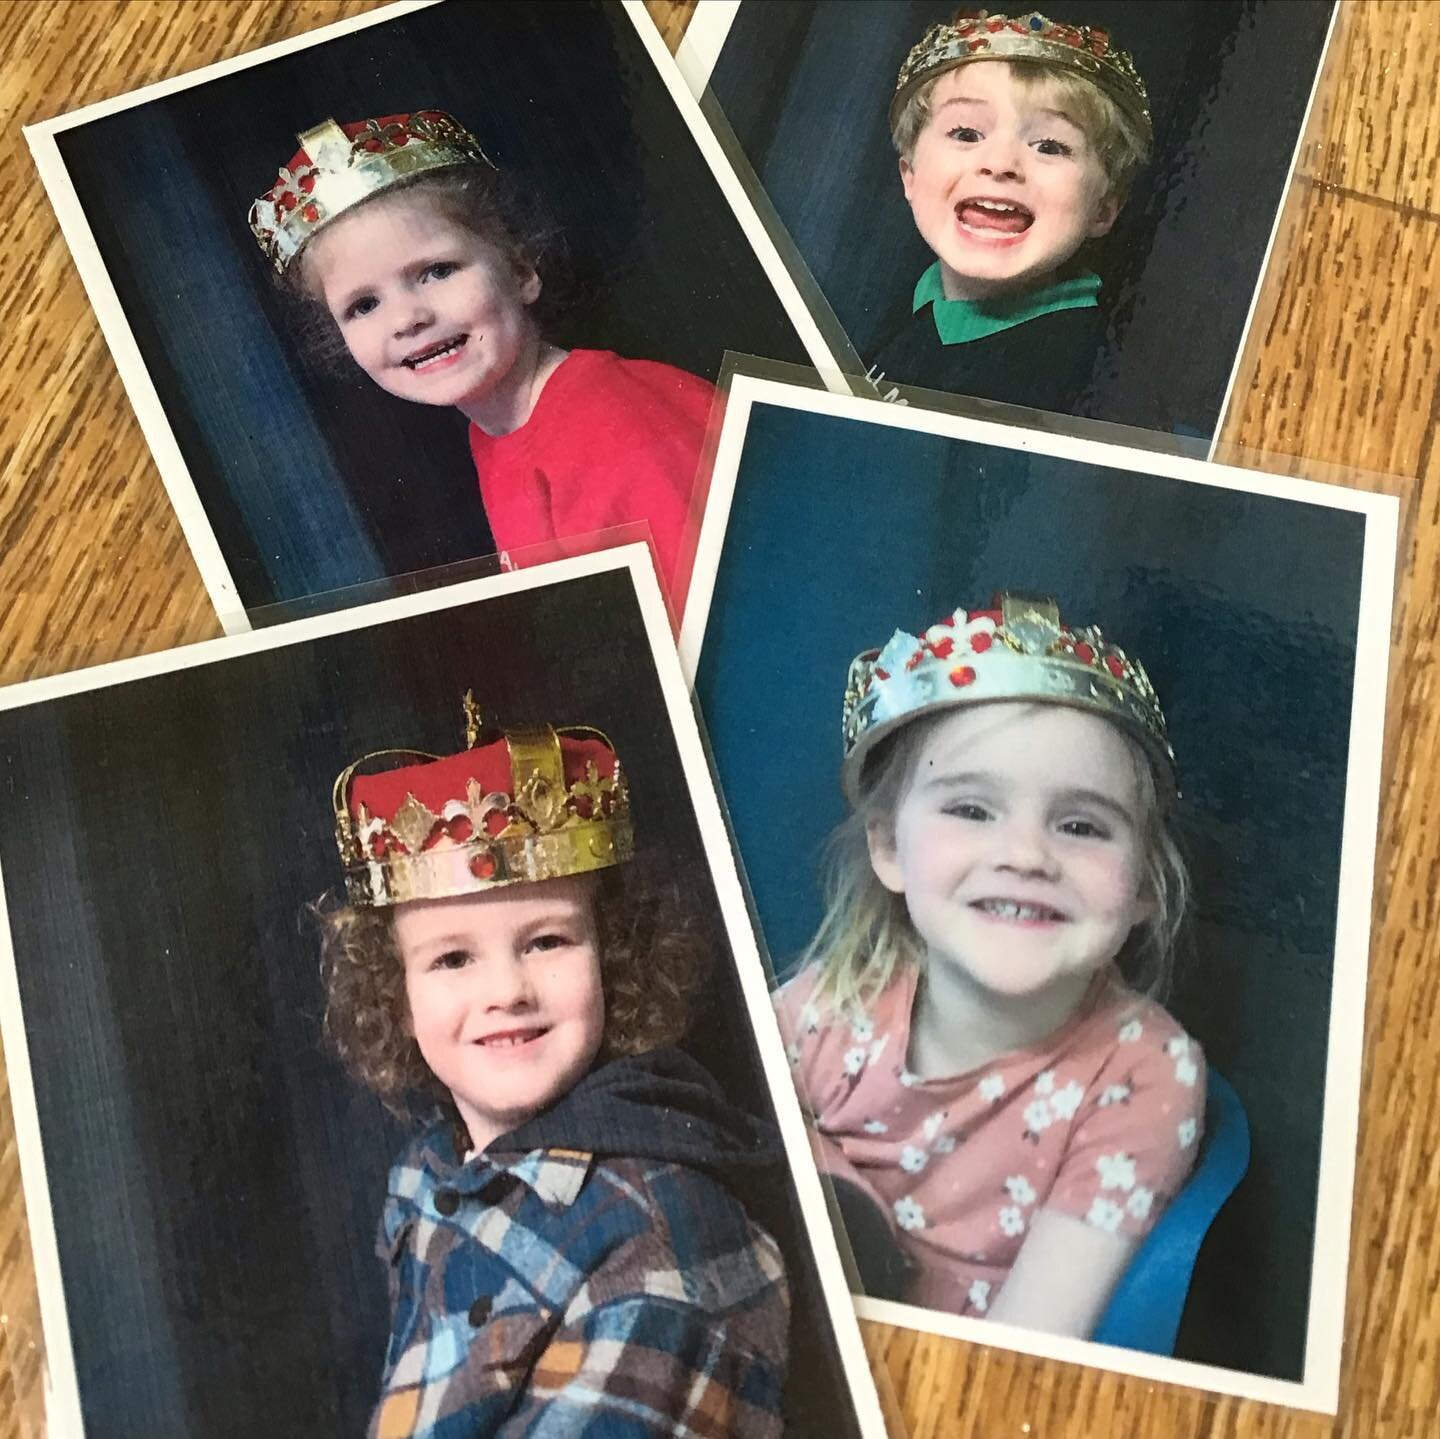 .
Our Coronation Party! 👑

After enjoying party food and dancing, the children took home with them a beautifully decorated crown, a royal photo of themselves and a personalised mug as a keepsake of the Coronation. 

*mugs were cleverly made by a par